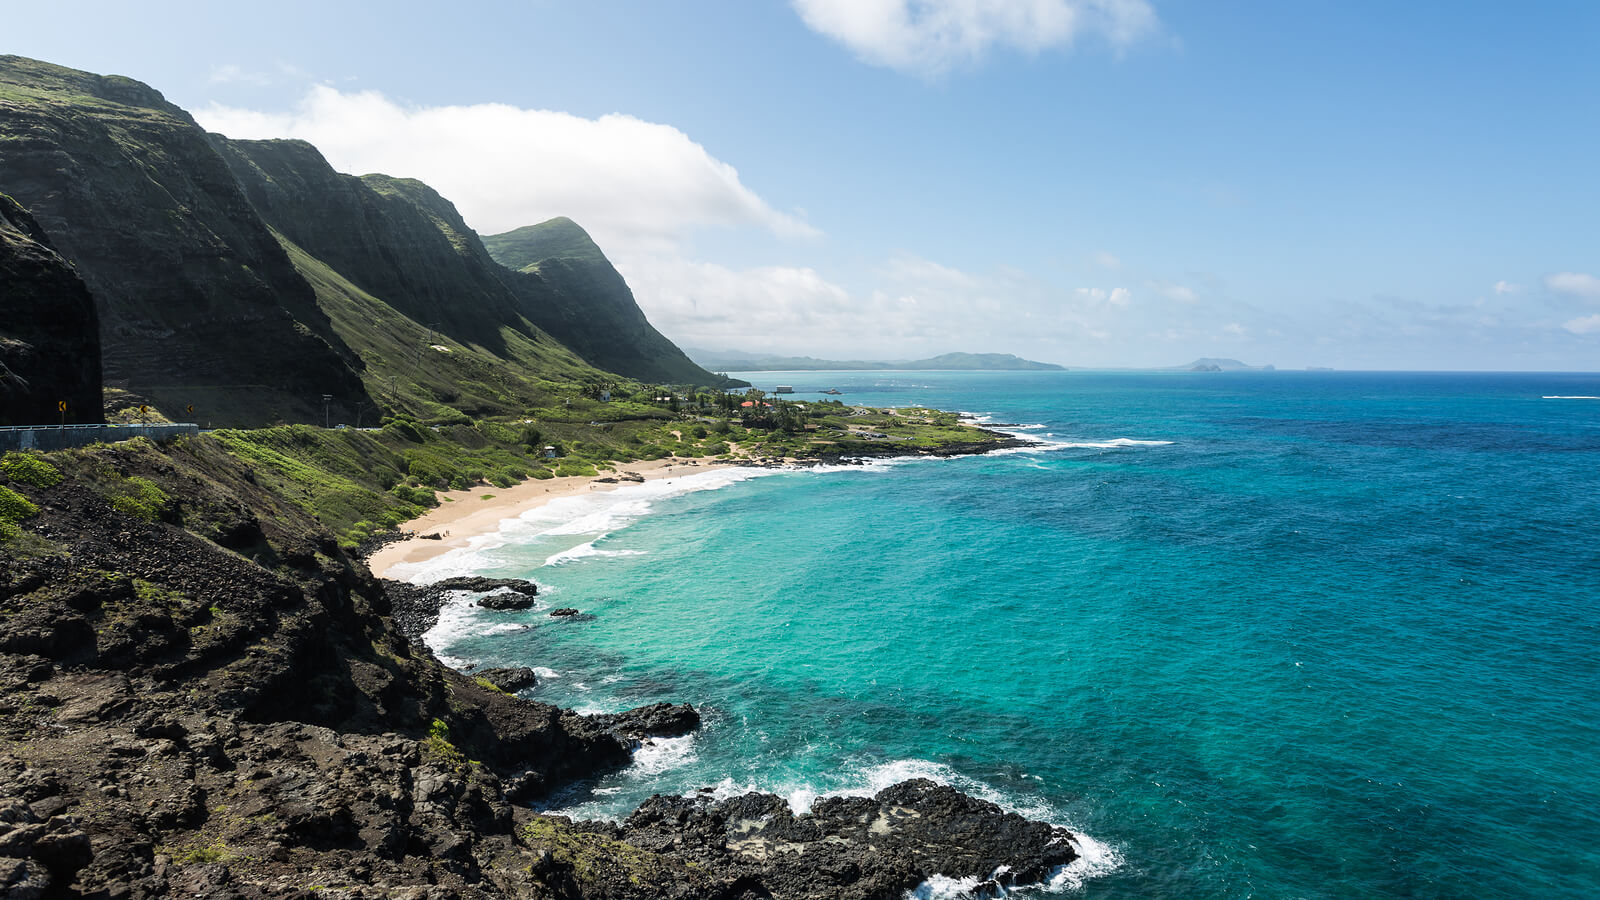 Photo Of Hawaii and The Ocean